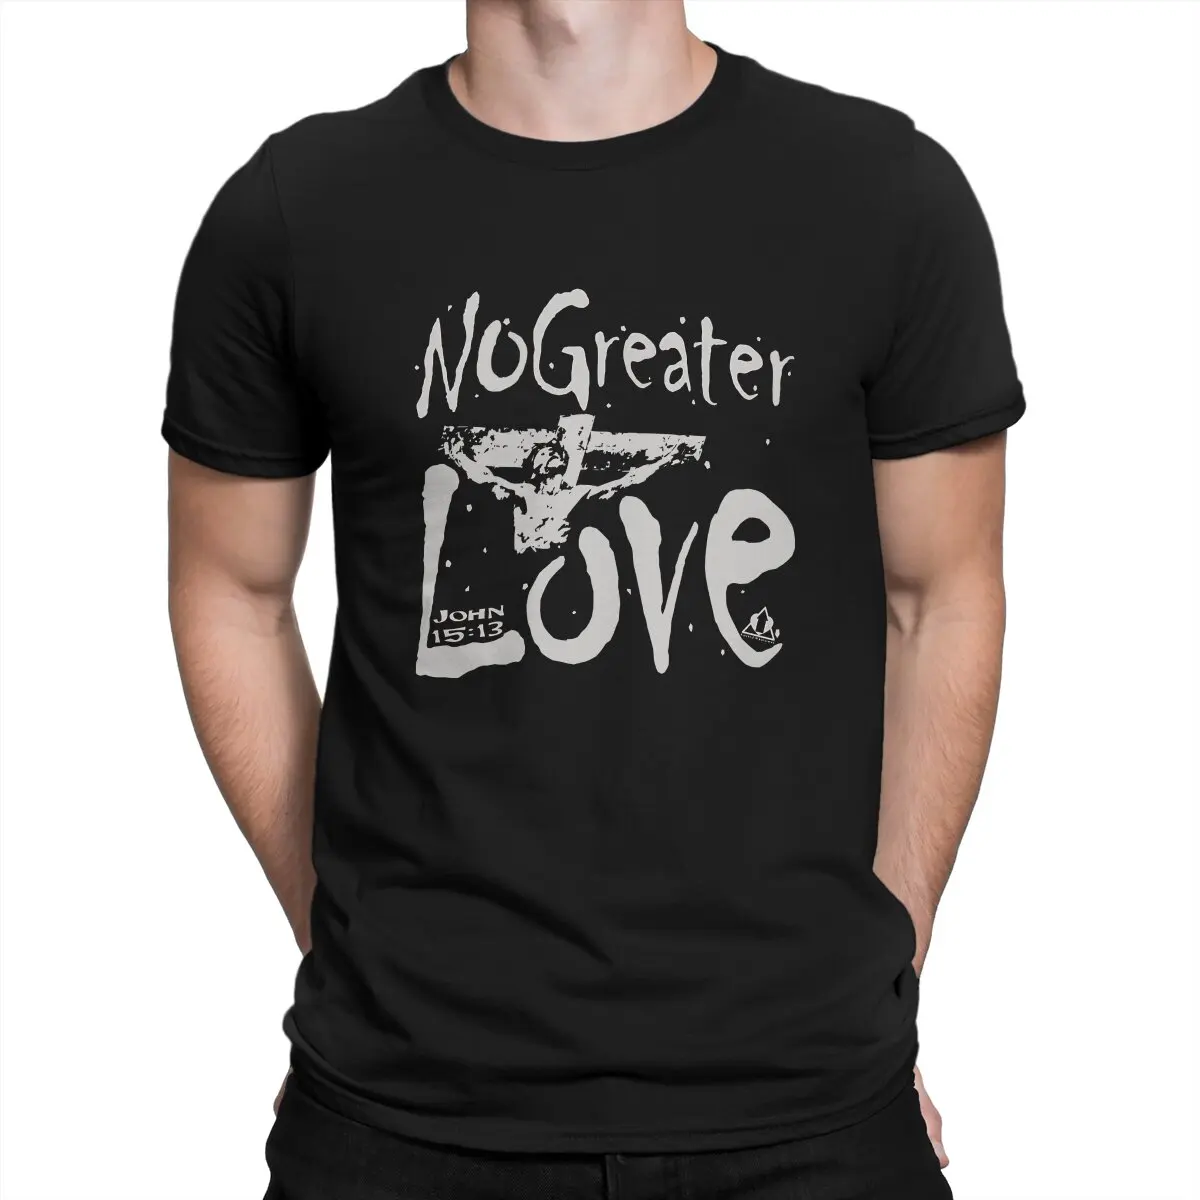 

Men T-Shirts No Greater Love Christian Bible Quote Faith Design Classic Casual Tees Short Sleeve Jesus God T Shirt Crew Neck